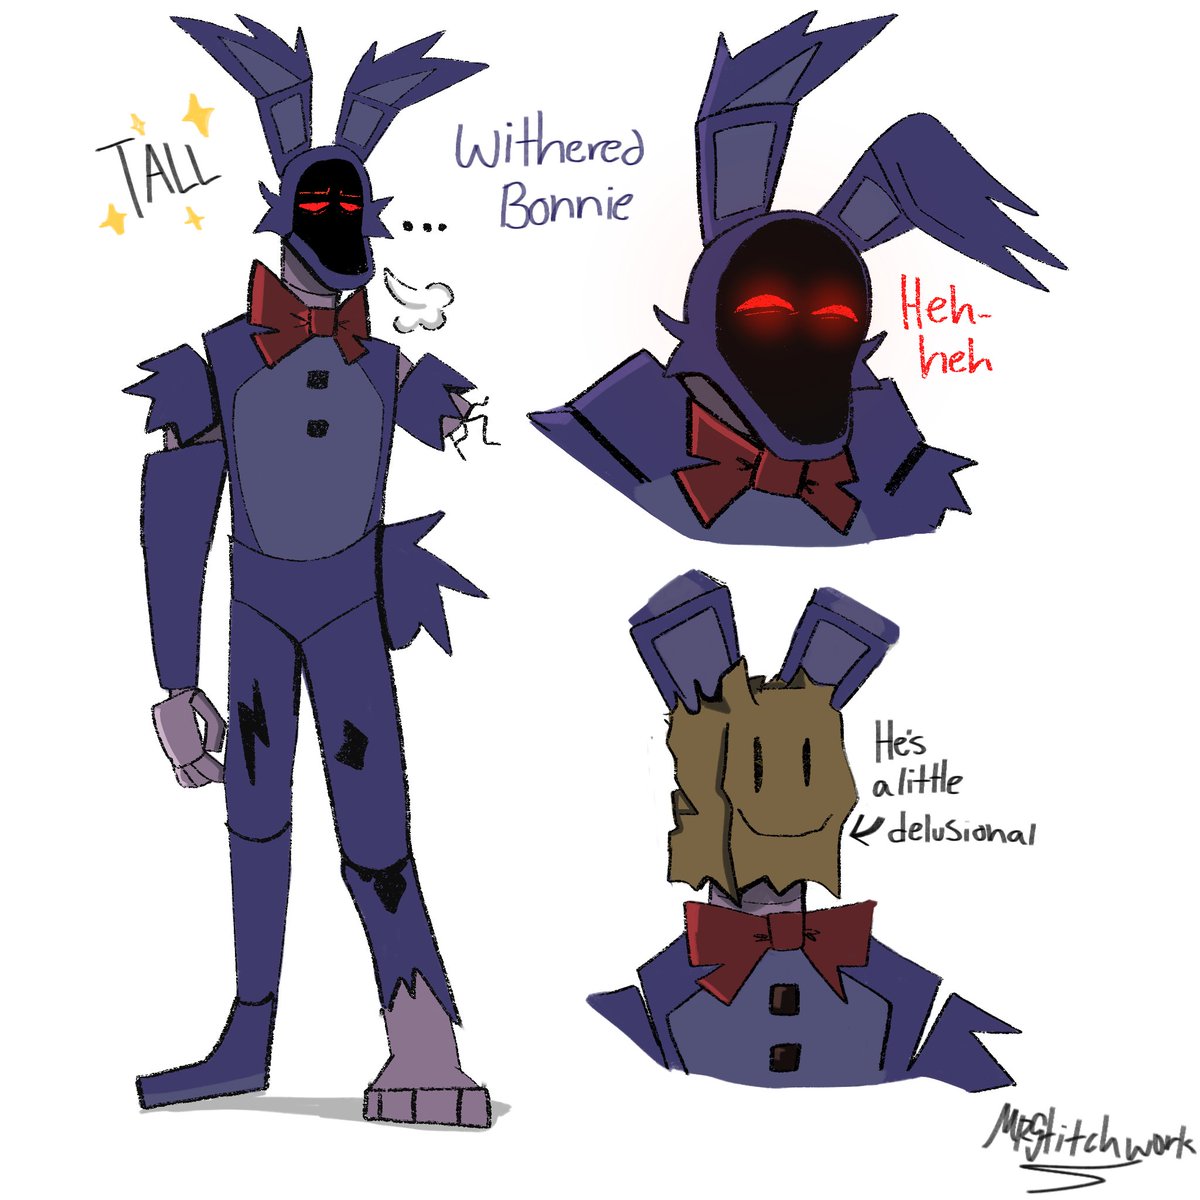 Withered Bonnie because he’s my favorite <3 #FNAF #fnaf2 #fnaffanart #witheredbonnie